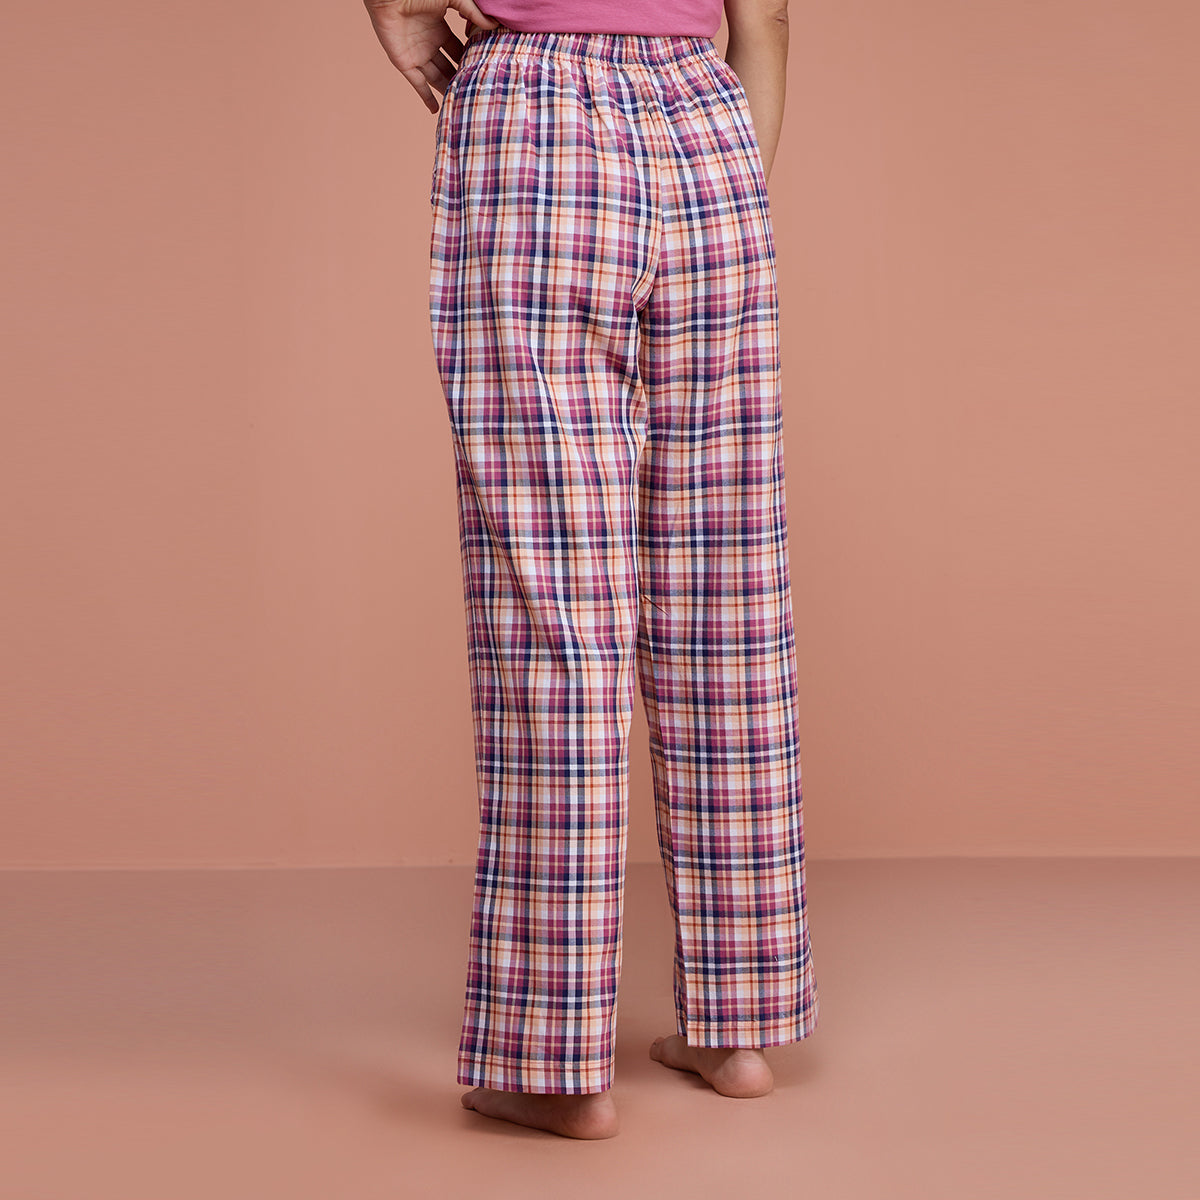 Nykd By Nykaa Super Comfy Cotton Relax Fit Pajama-NYS141-Red Violet Plaid